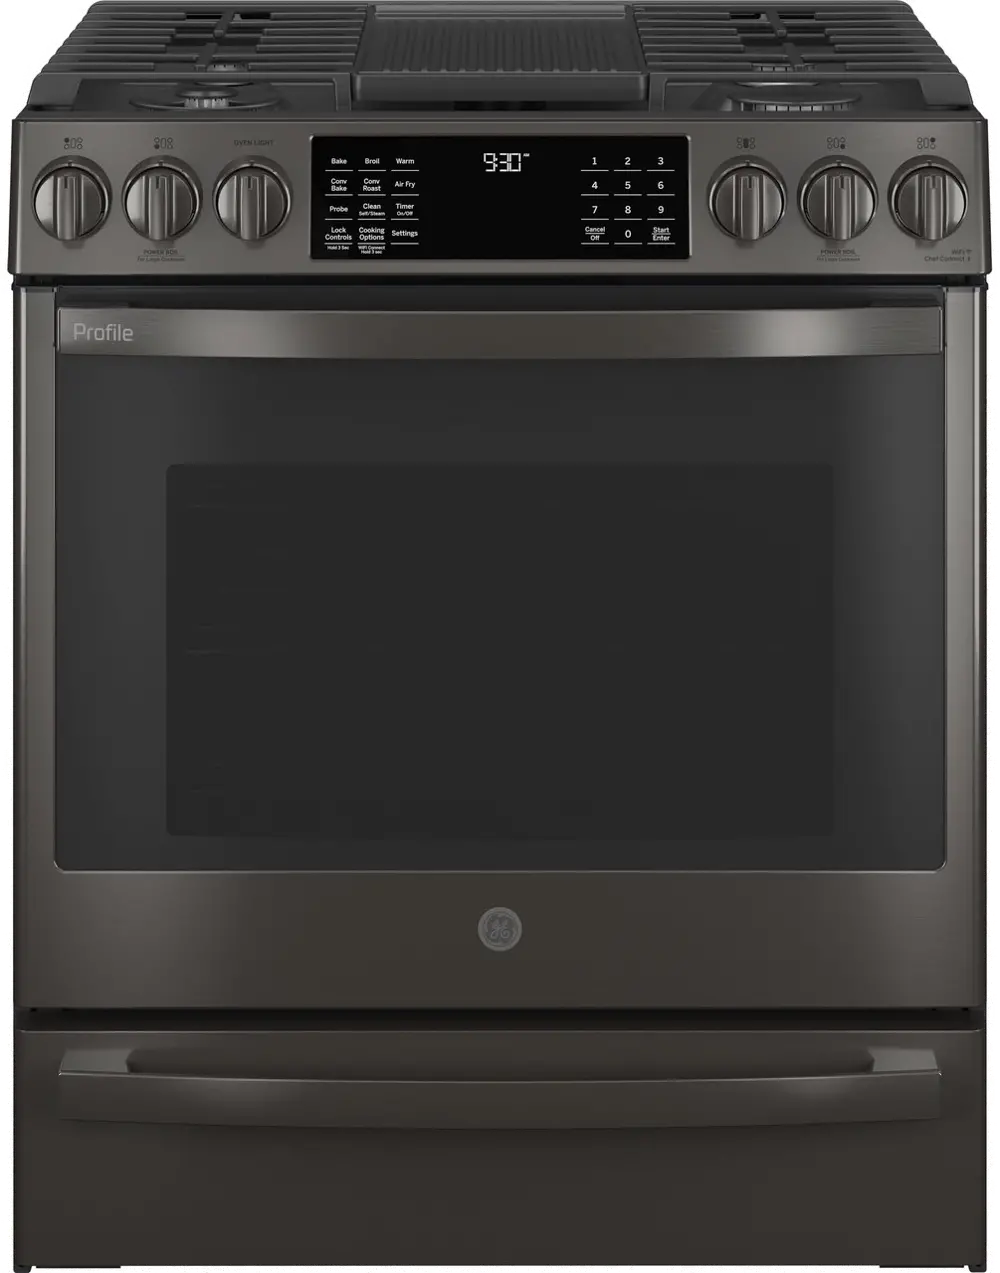 PGS930BPTS GE Profile 30 Inch Slide In Smart Gas Range with Convection - 5.3 cu. ft. Black Stainless Steel-1